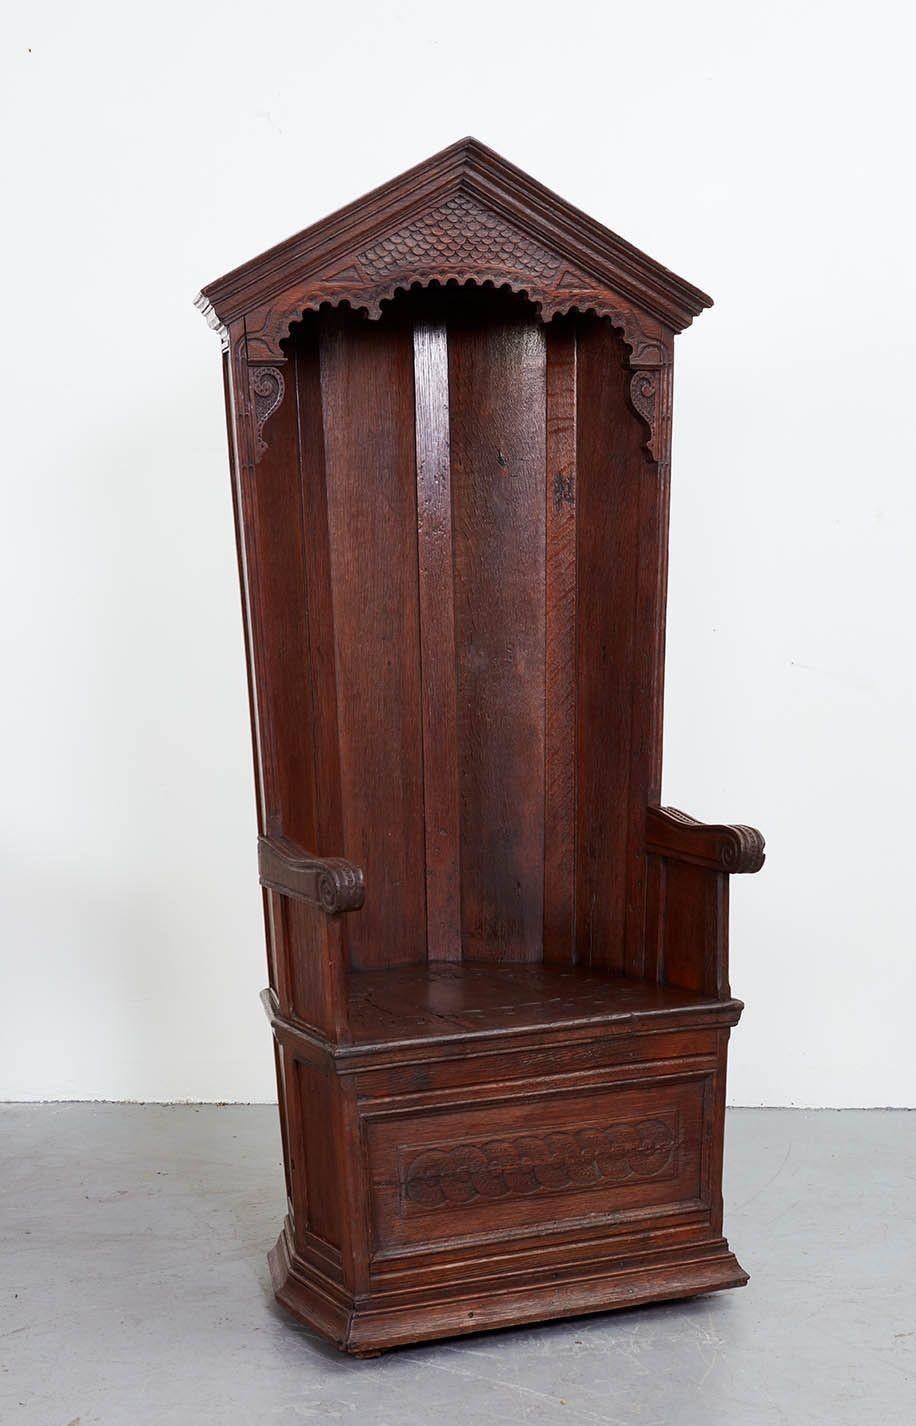 A magnificant 19th century oak porter's chair with a five point shaped hood above a carved arch, surrounding a seat and arms, the back equally made for show and finished with architecturally formed side panels over a lower dado rail, matching panels